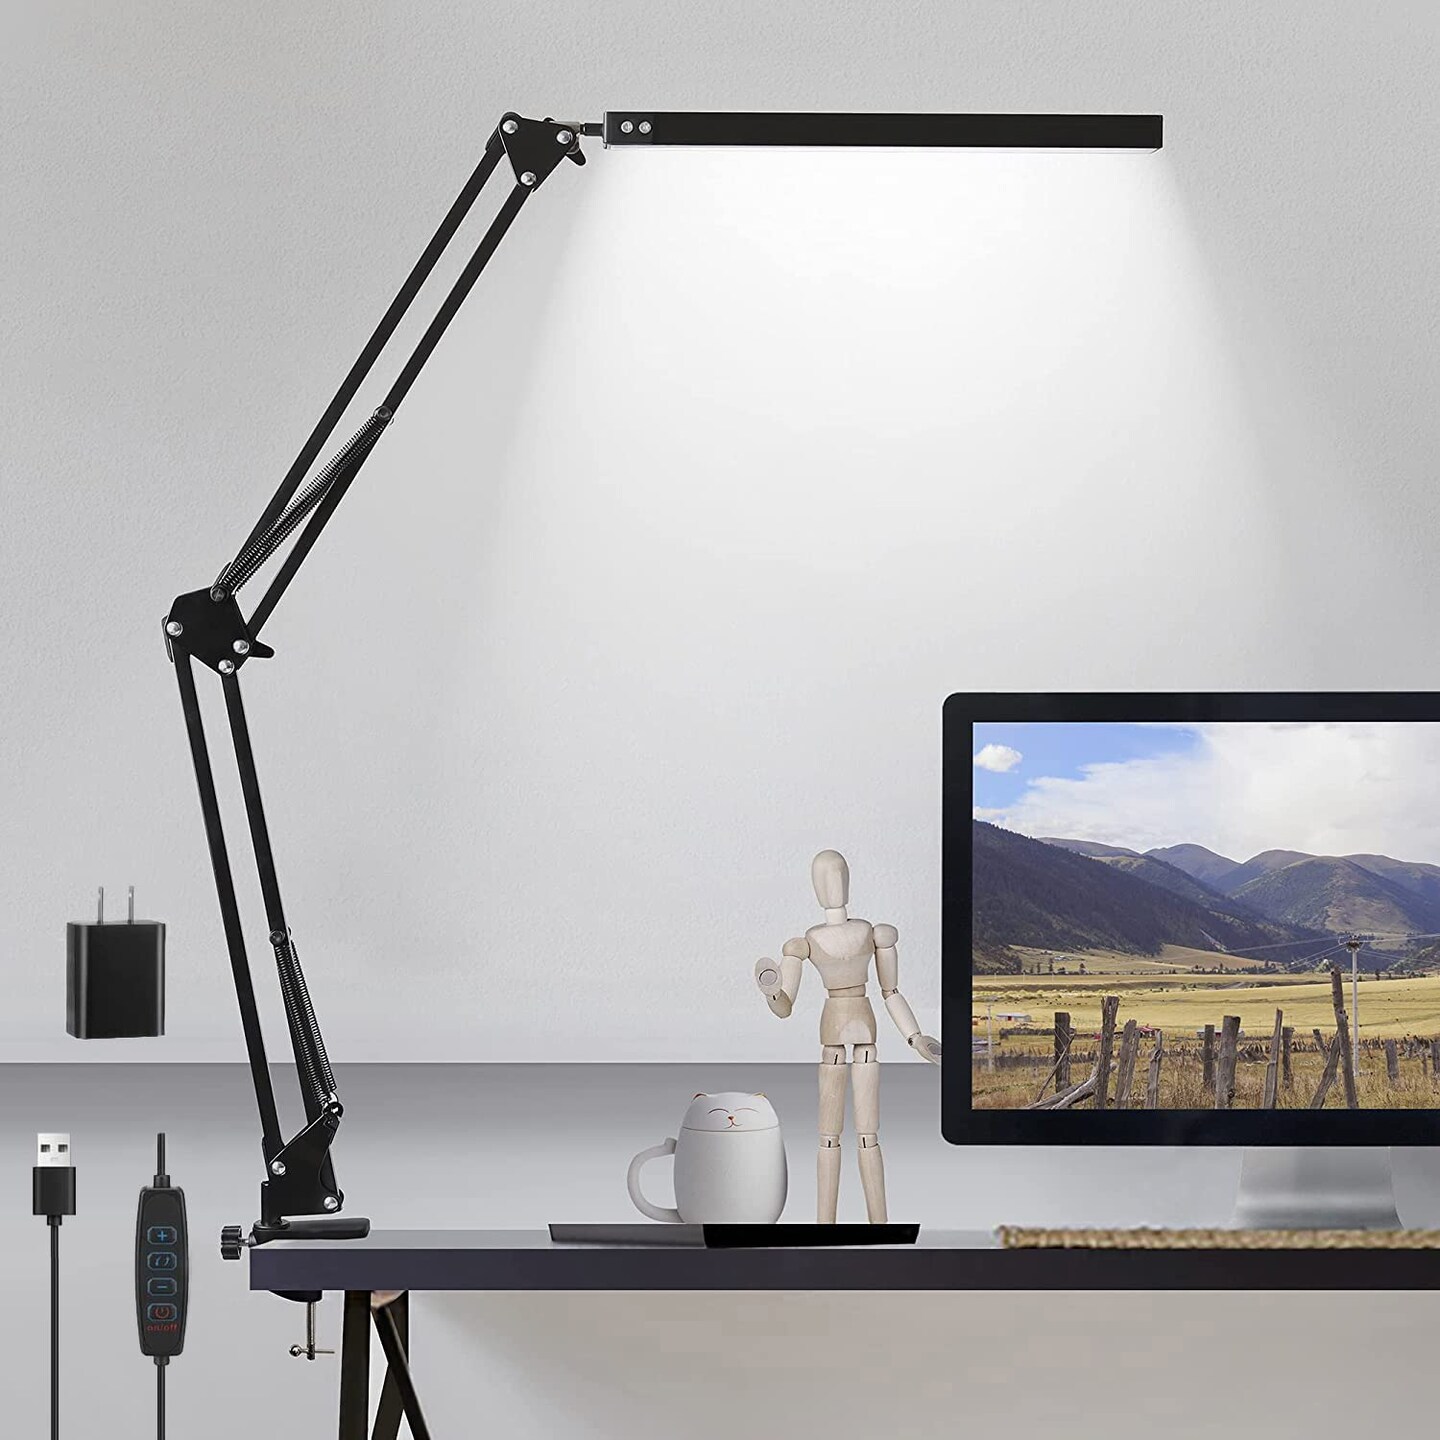 LED Desk Lamp with Clamp, 3 Color Modes Architect Modern Swing Arm Lamp Desk Light, Dimmable Eye-Care Table Light, Memory Function, Task, Study, Reading, Work, Craft, Sewing, Drafting, Home Office 10W